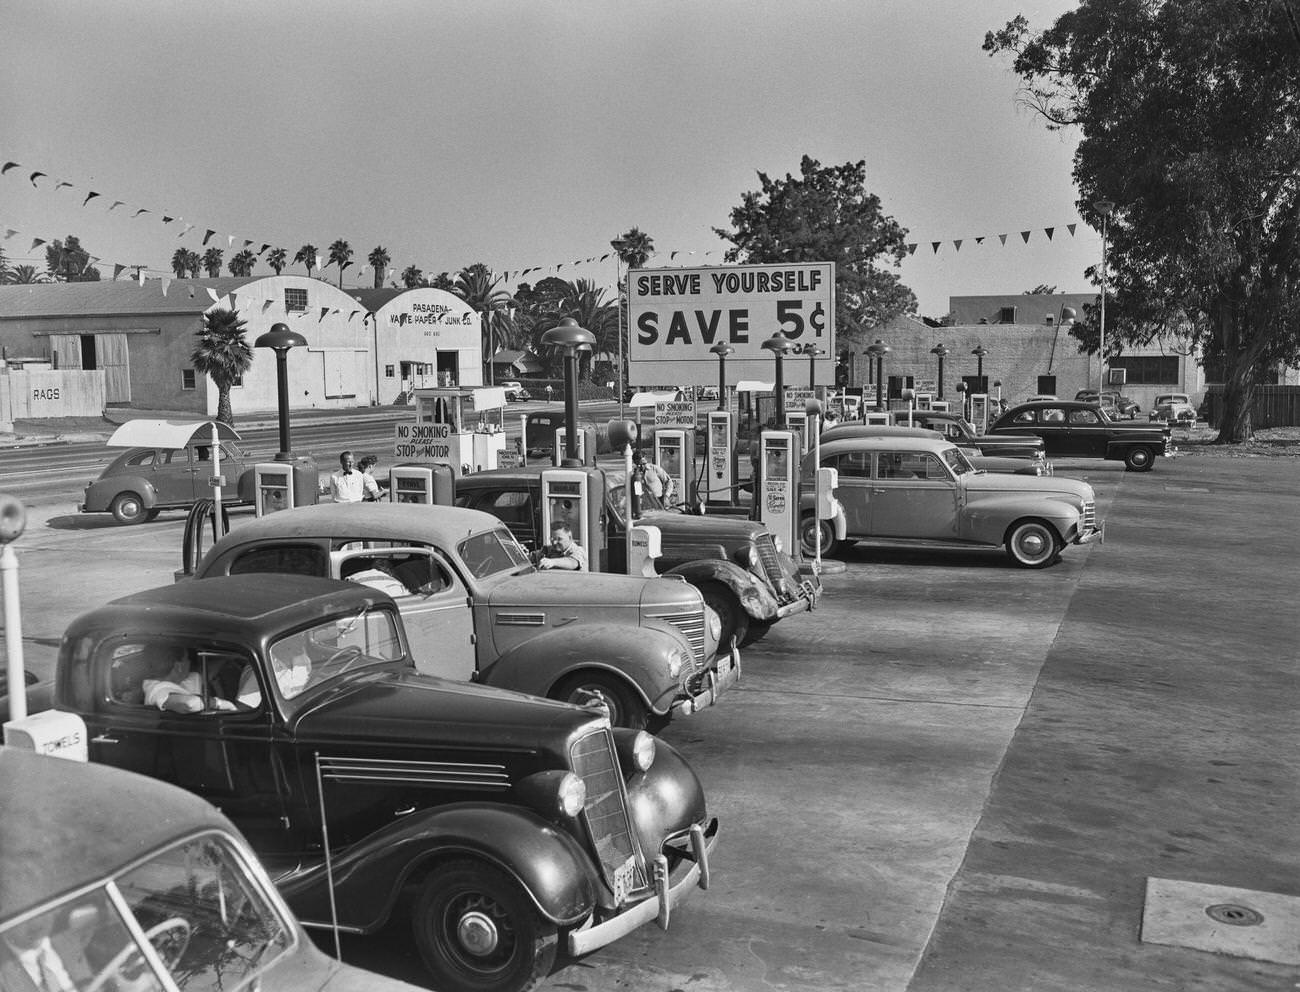 Self-Service Gas Station in Pasadena with Signage, 1955